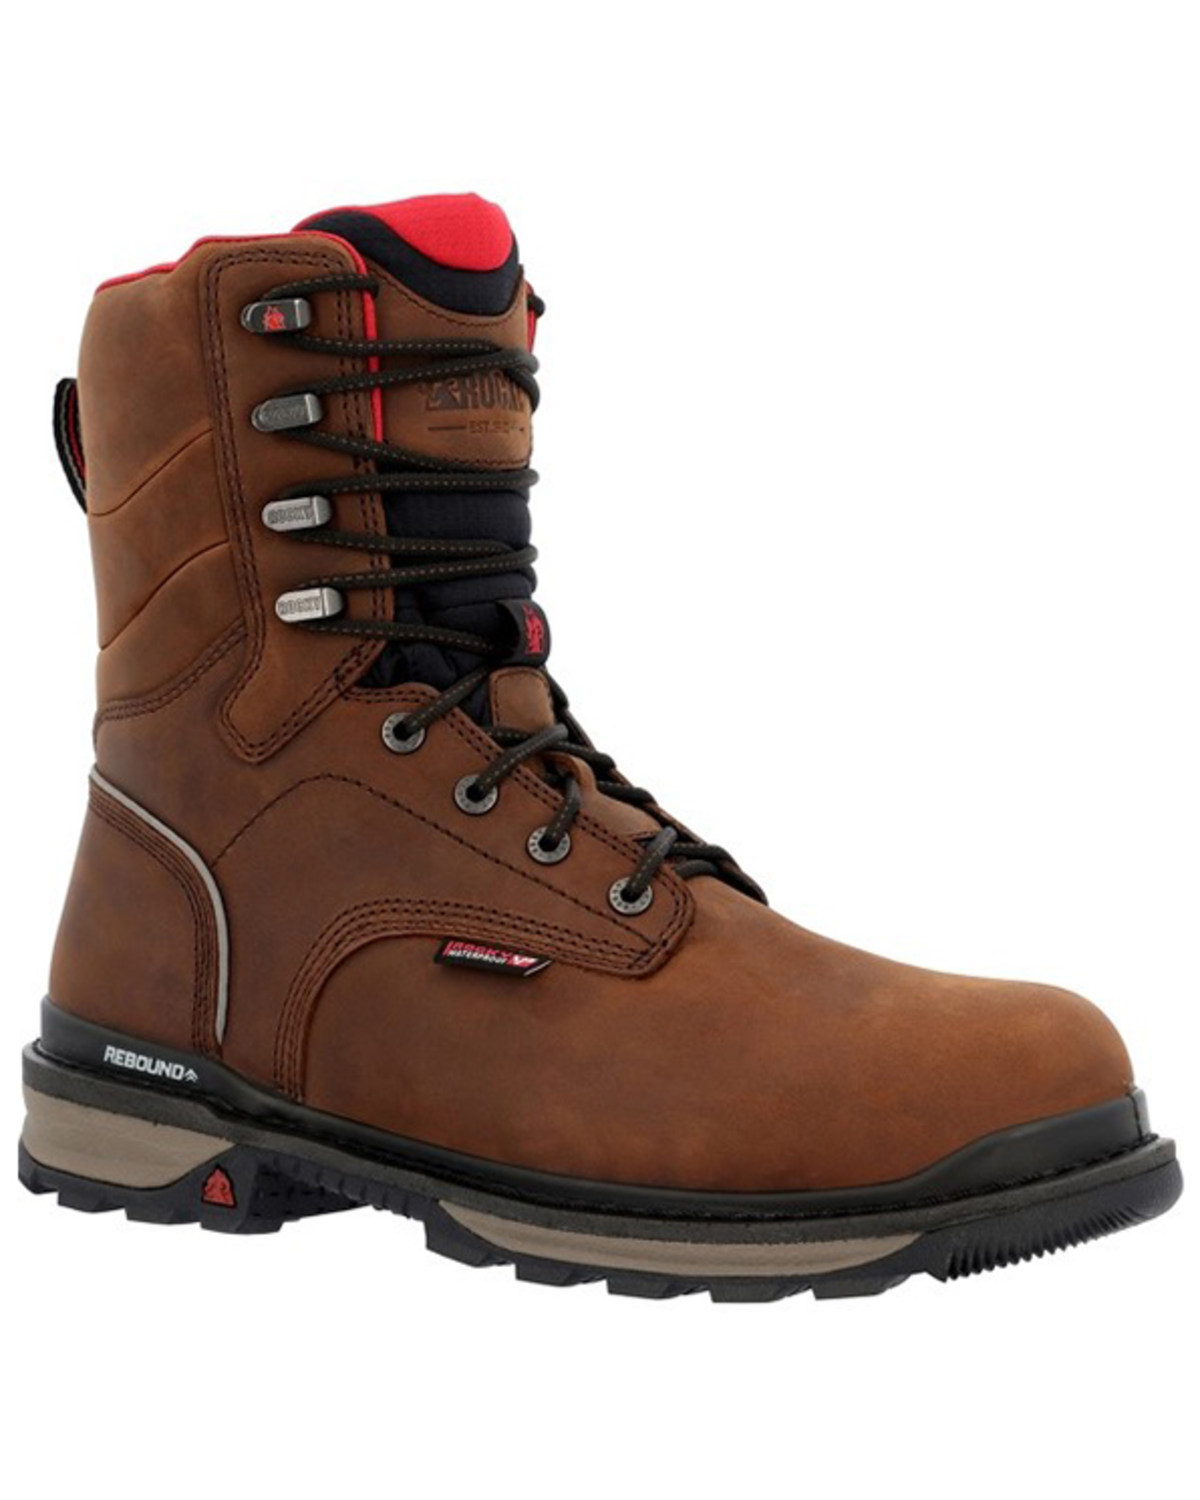 Rocky Men's Rams Horn Waterproof 8" Lace-Up Work Boots - Composite Toe